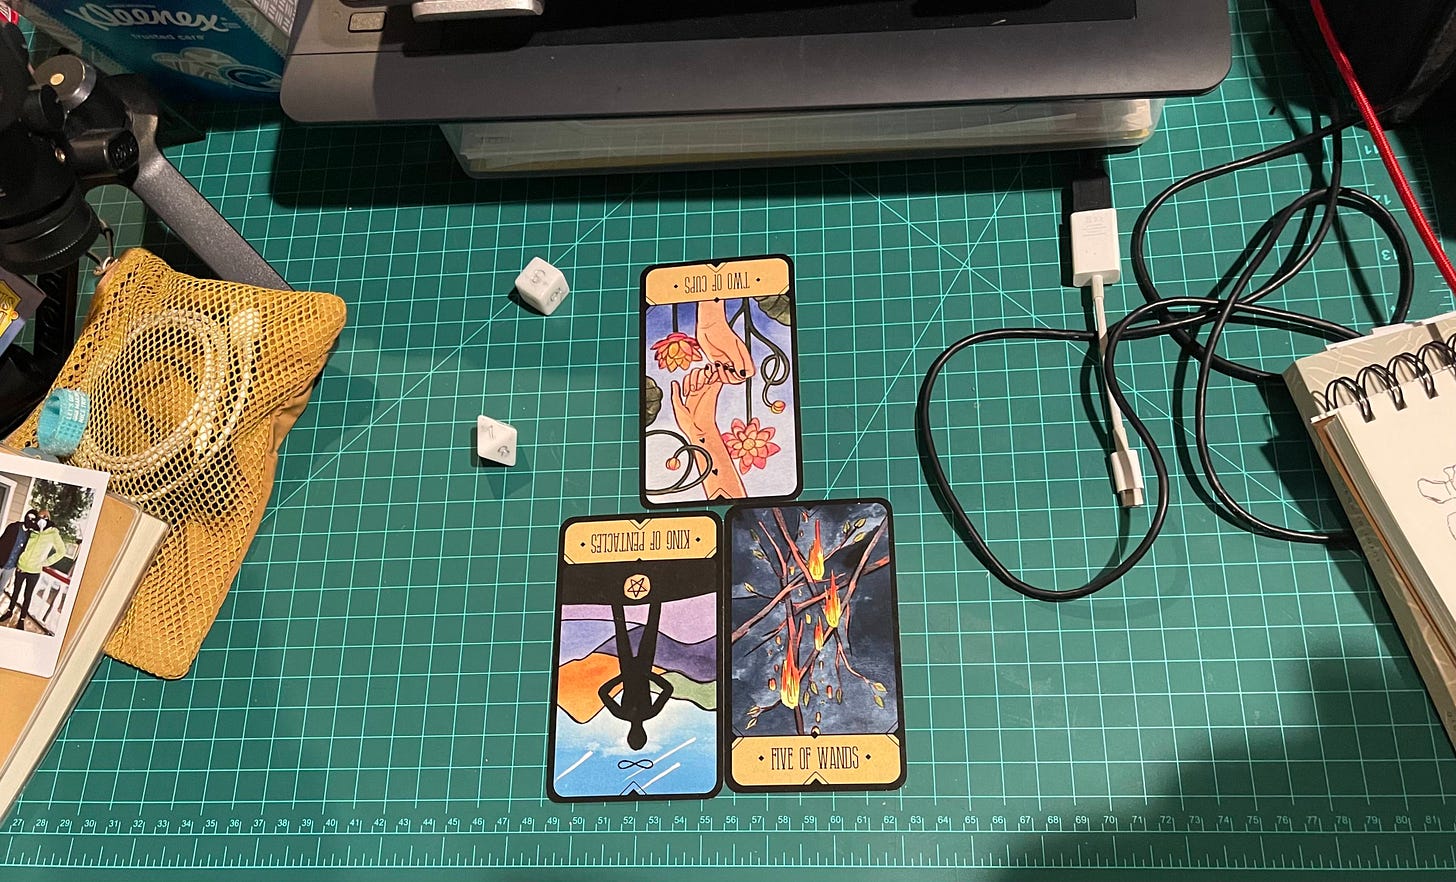 Picture of the tarot spread in the center of a mildly cluttered desk. Electronics, wires, and loose ephemera surround the three cards, Two of Wands, King of Pentacles, and Five of Wands.